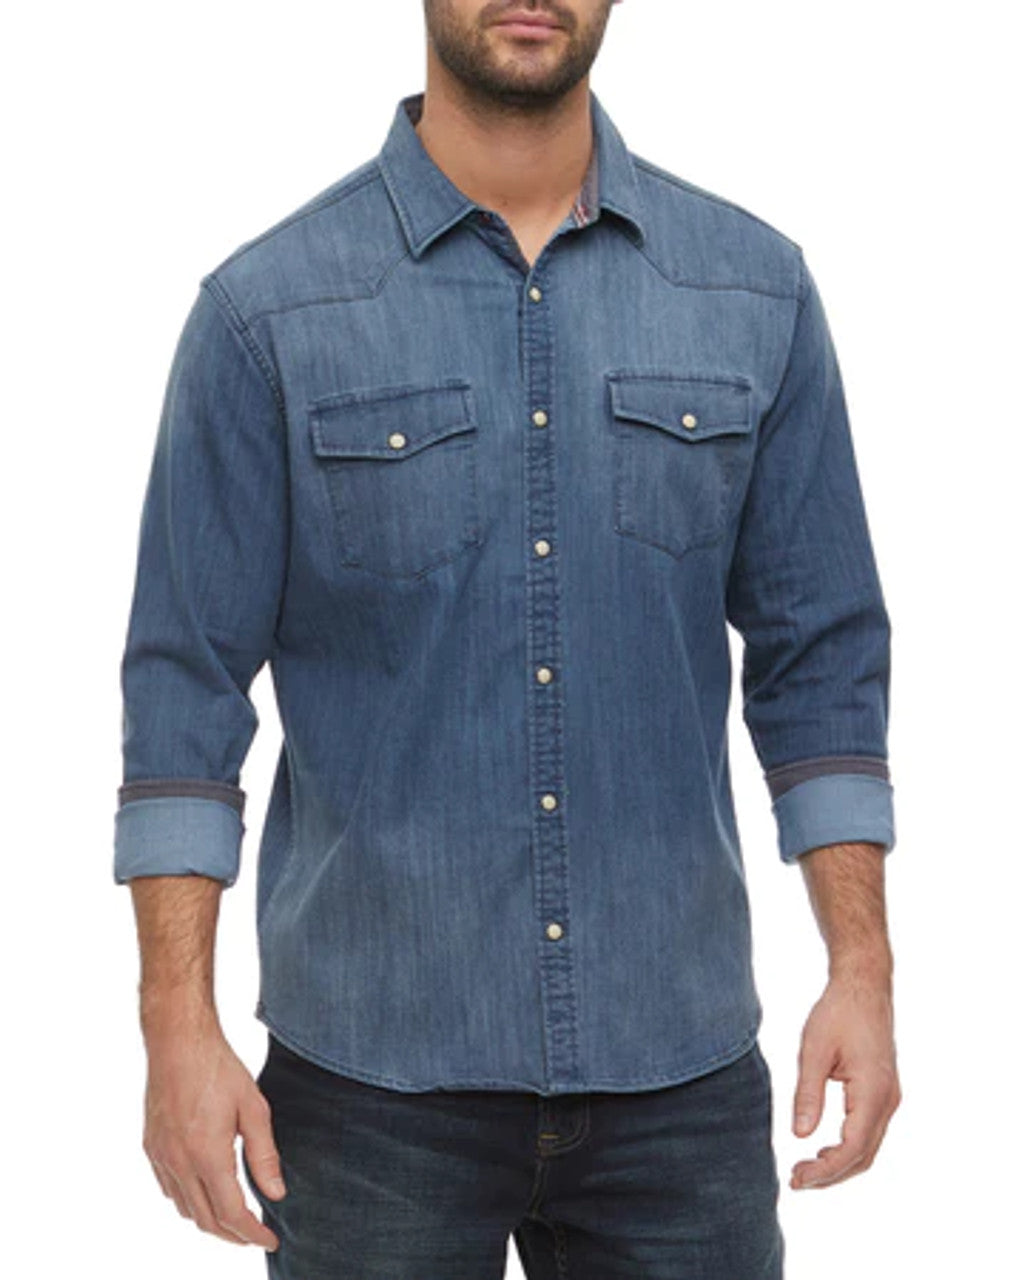 Canyon Of Heroes Men's Wild West Stretch Light Blue Denim Shirt WS2300 –  Wild West Boot Store